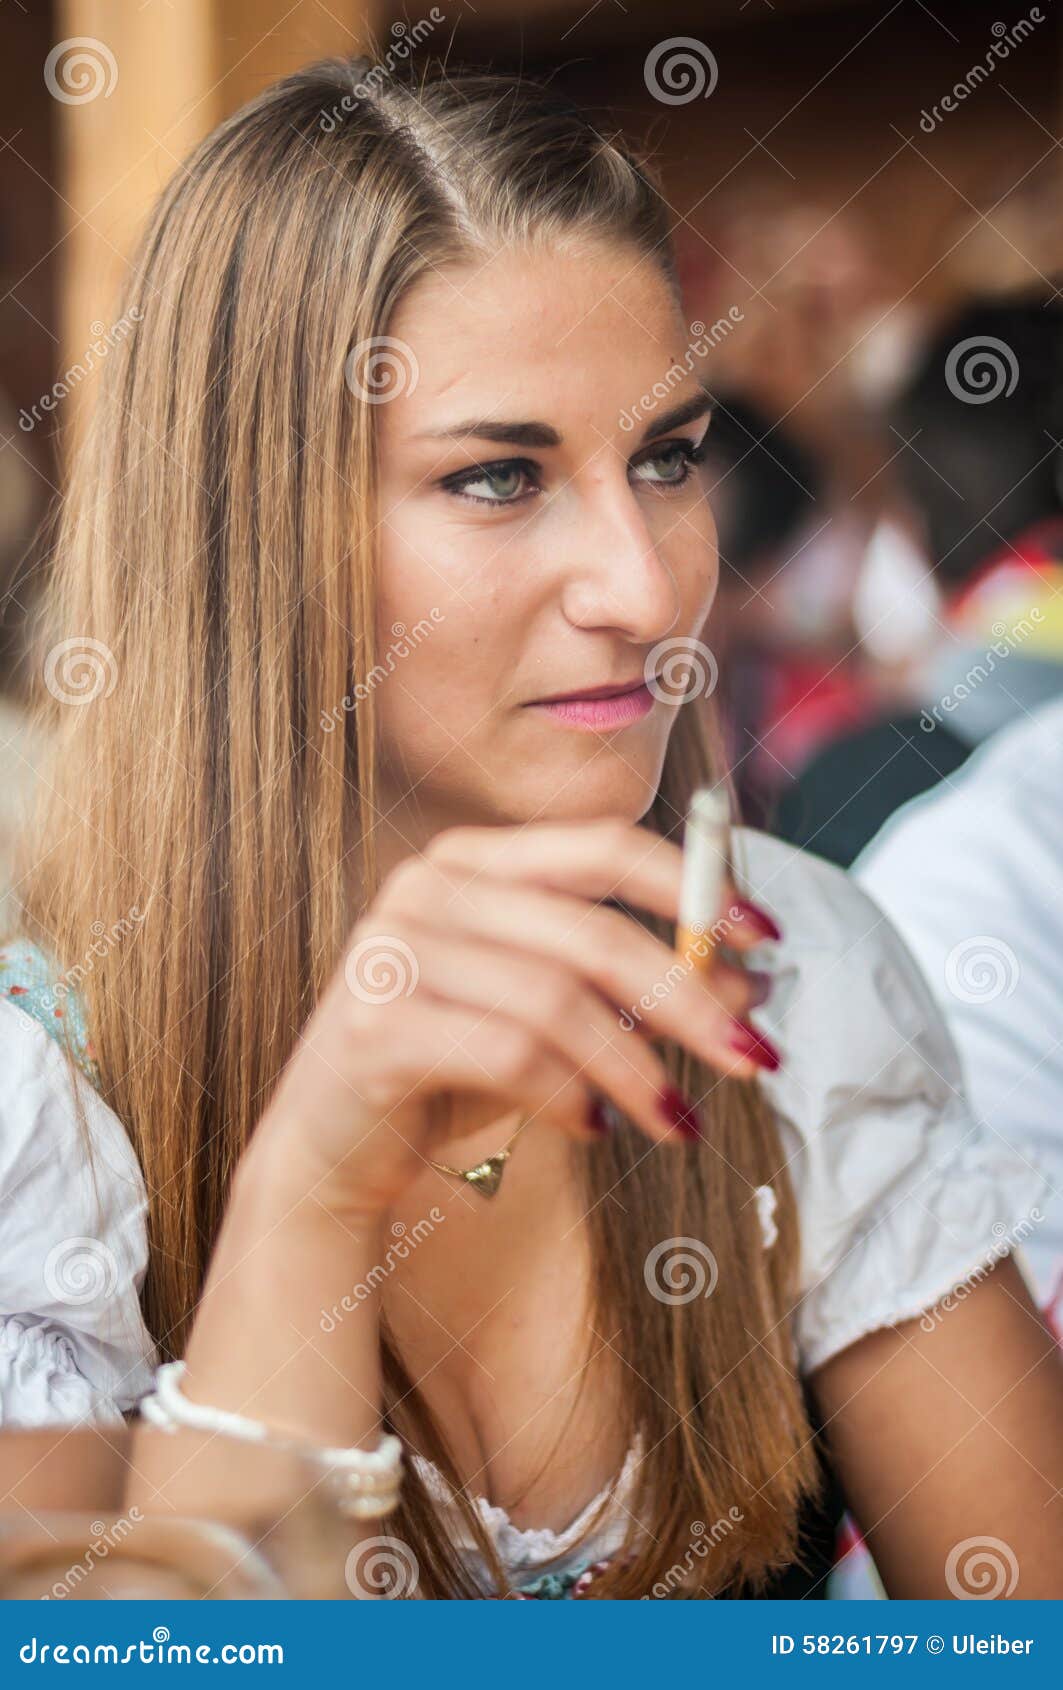 Young Woman In Dirndl Dress Sitting And Smoking At Stock Image Image Of Bavarian Traditional 58261797